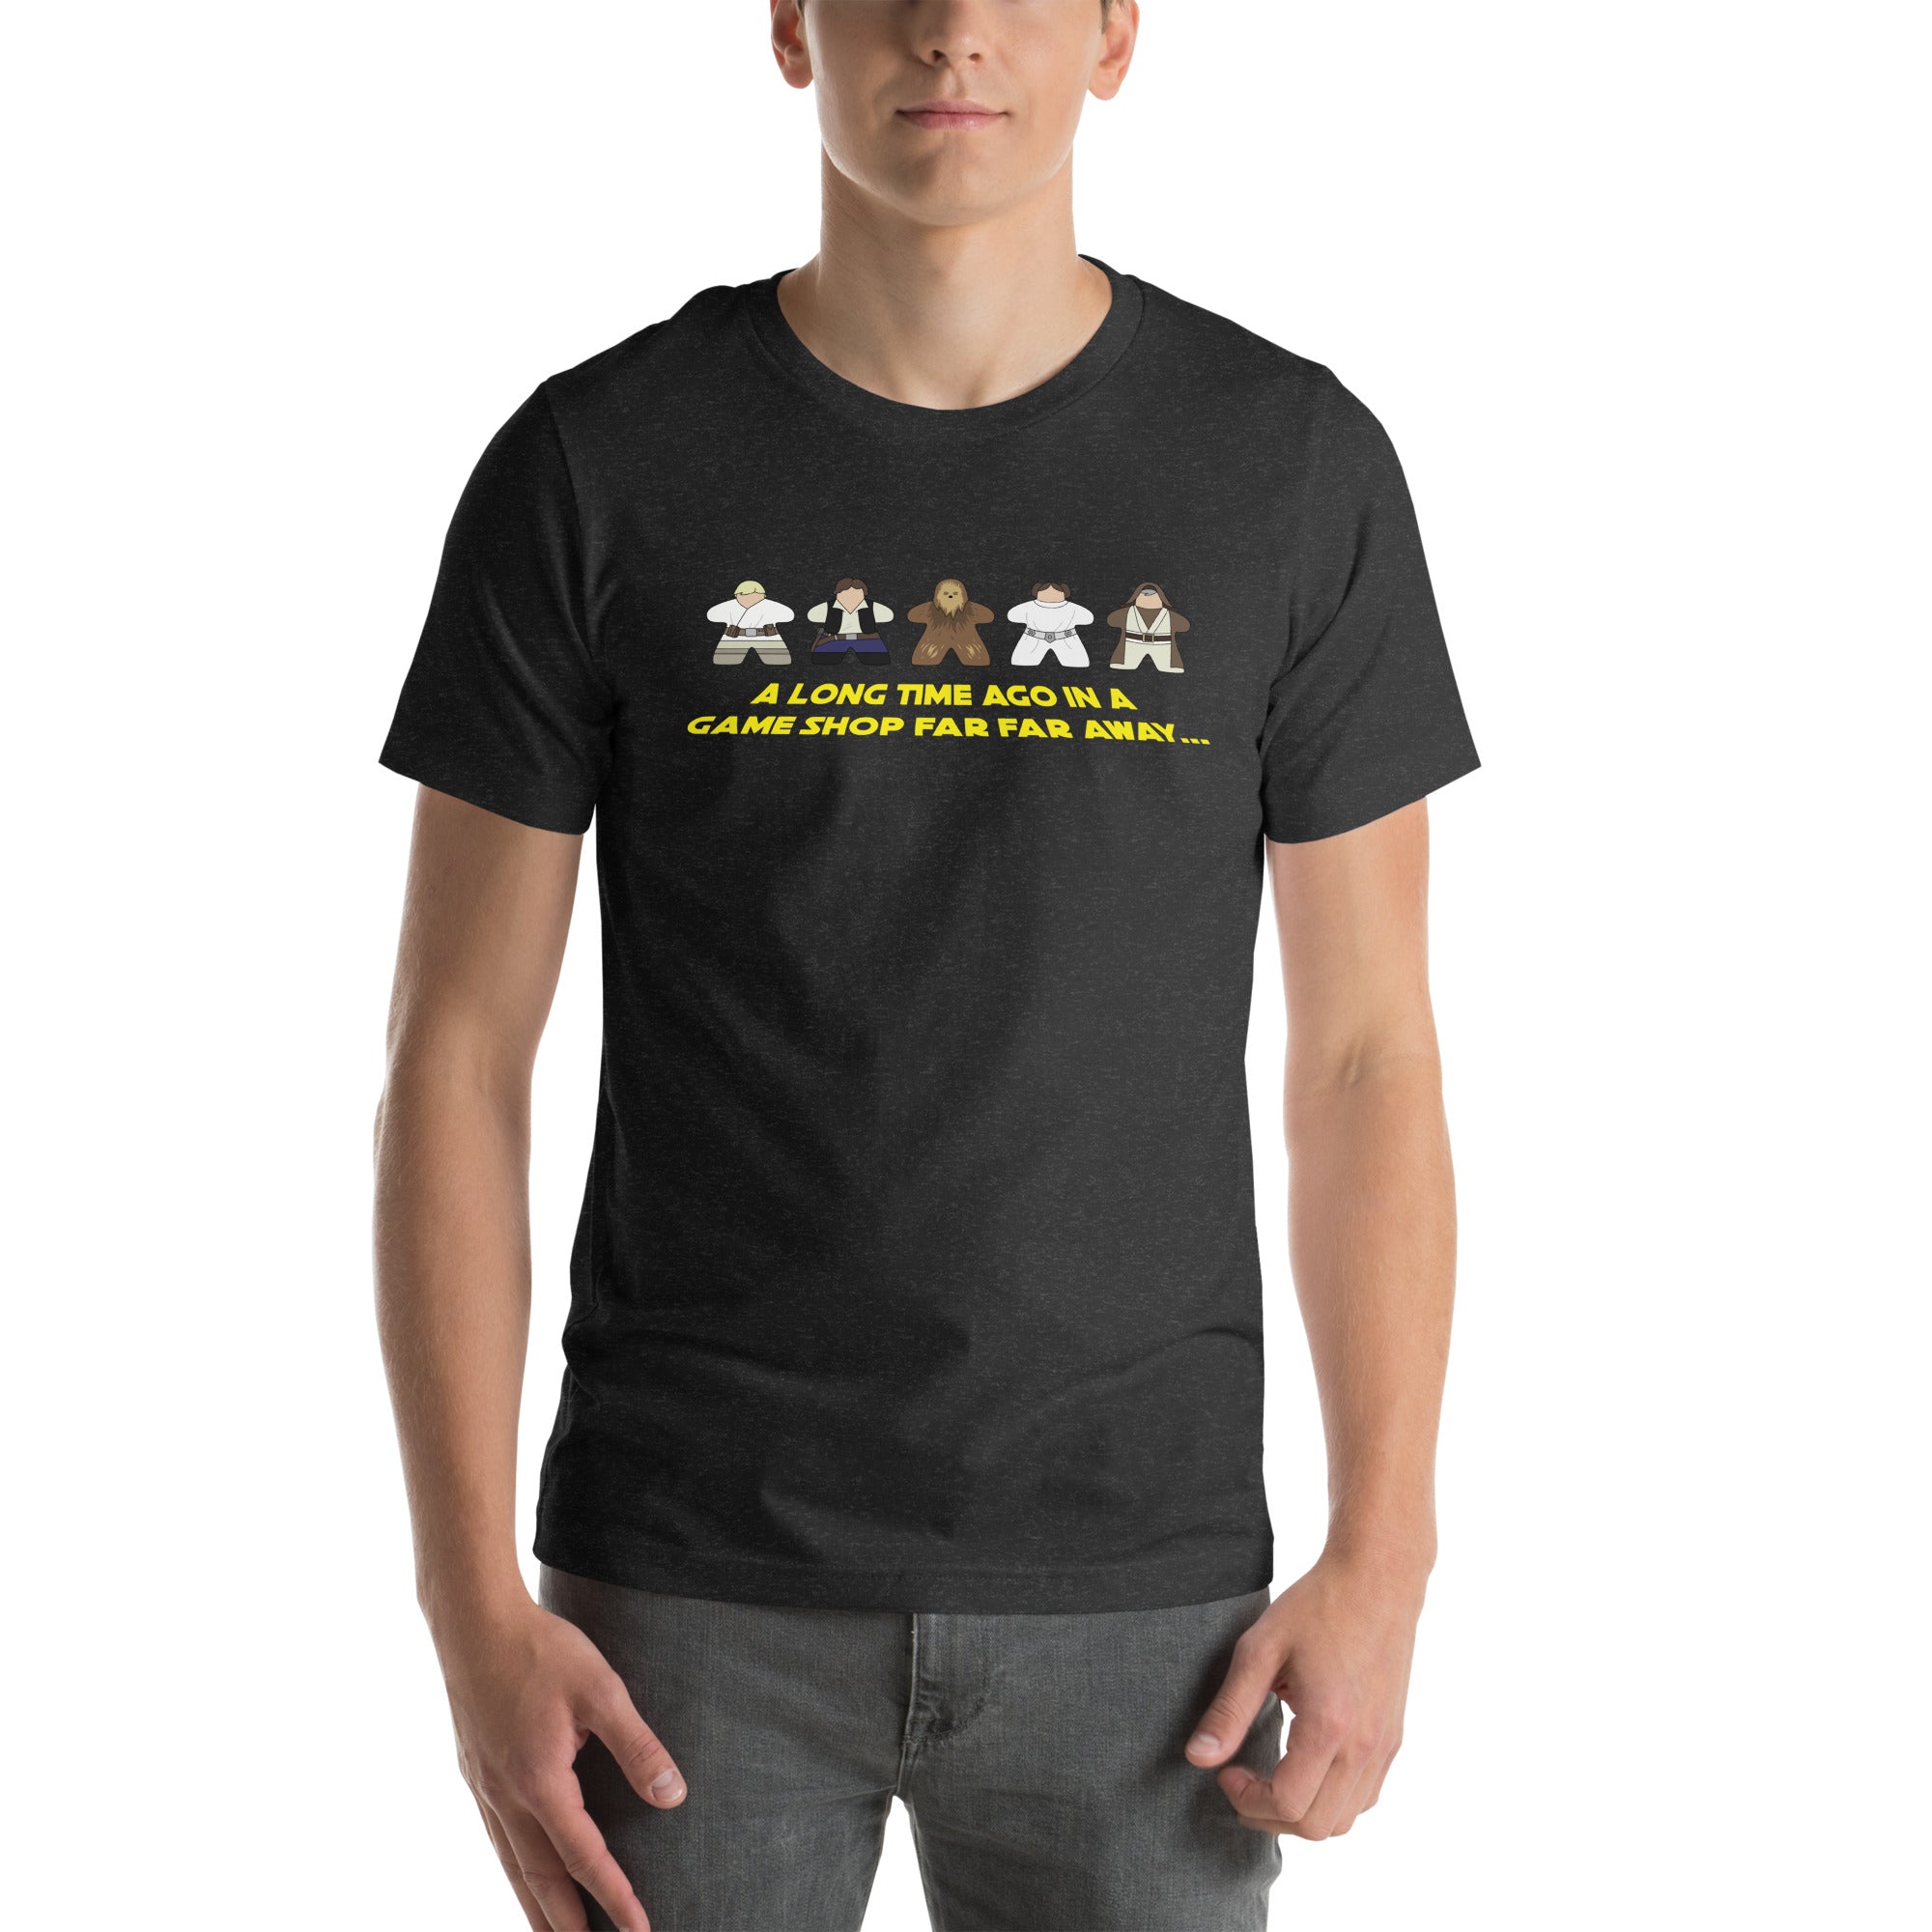 Heather Black T-Shirt with Star Wars Meeples Parody Design on skinny male model